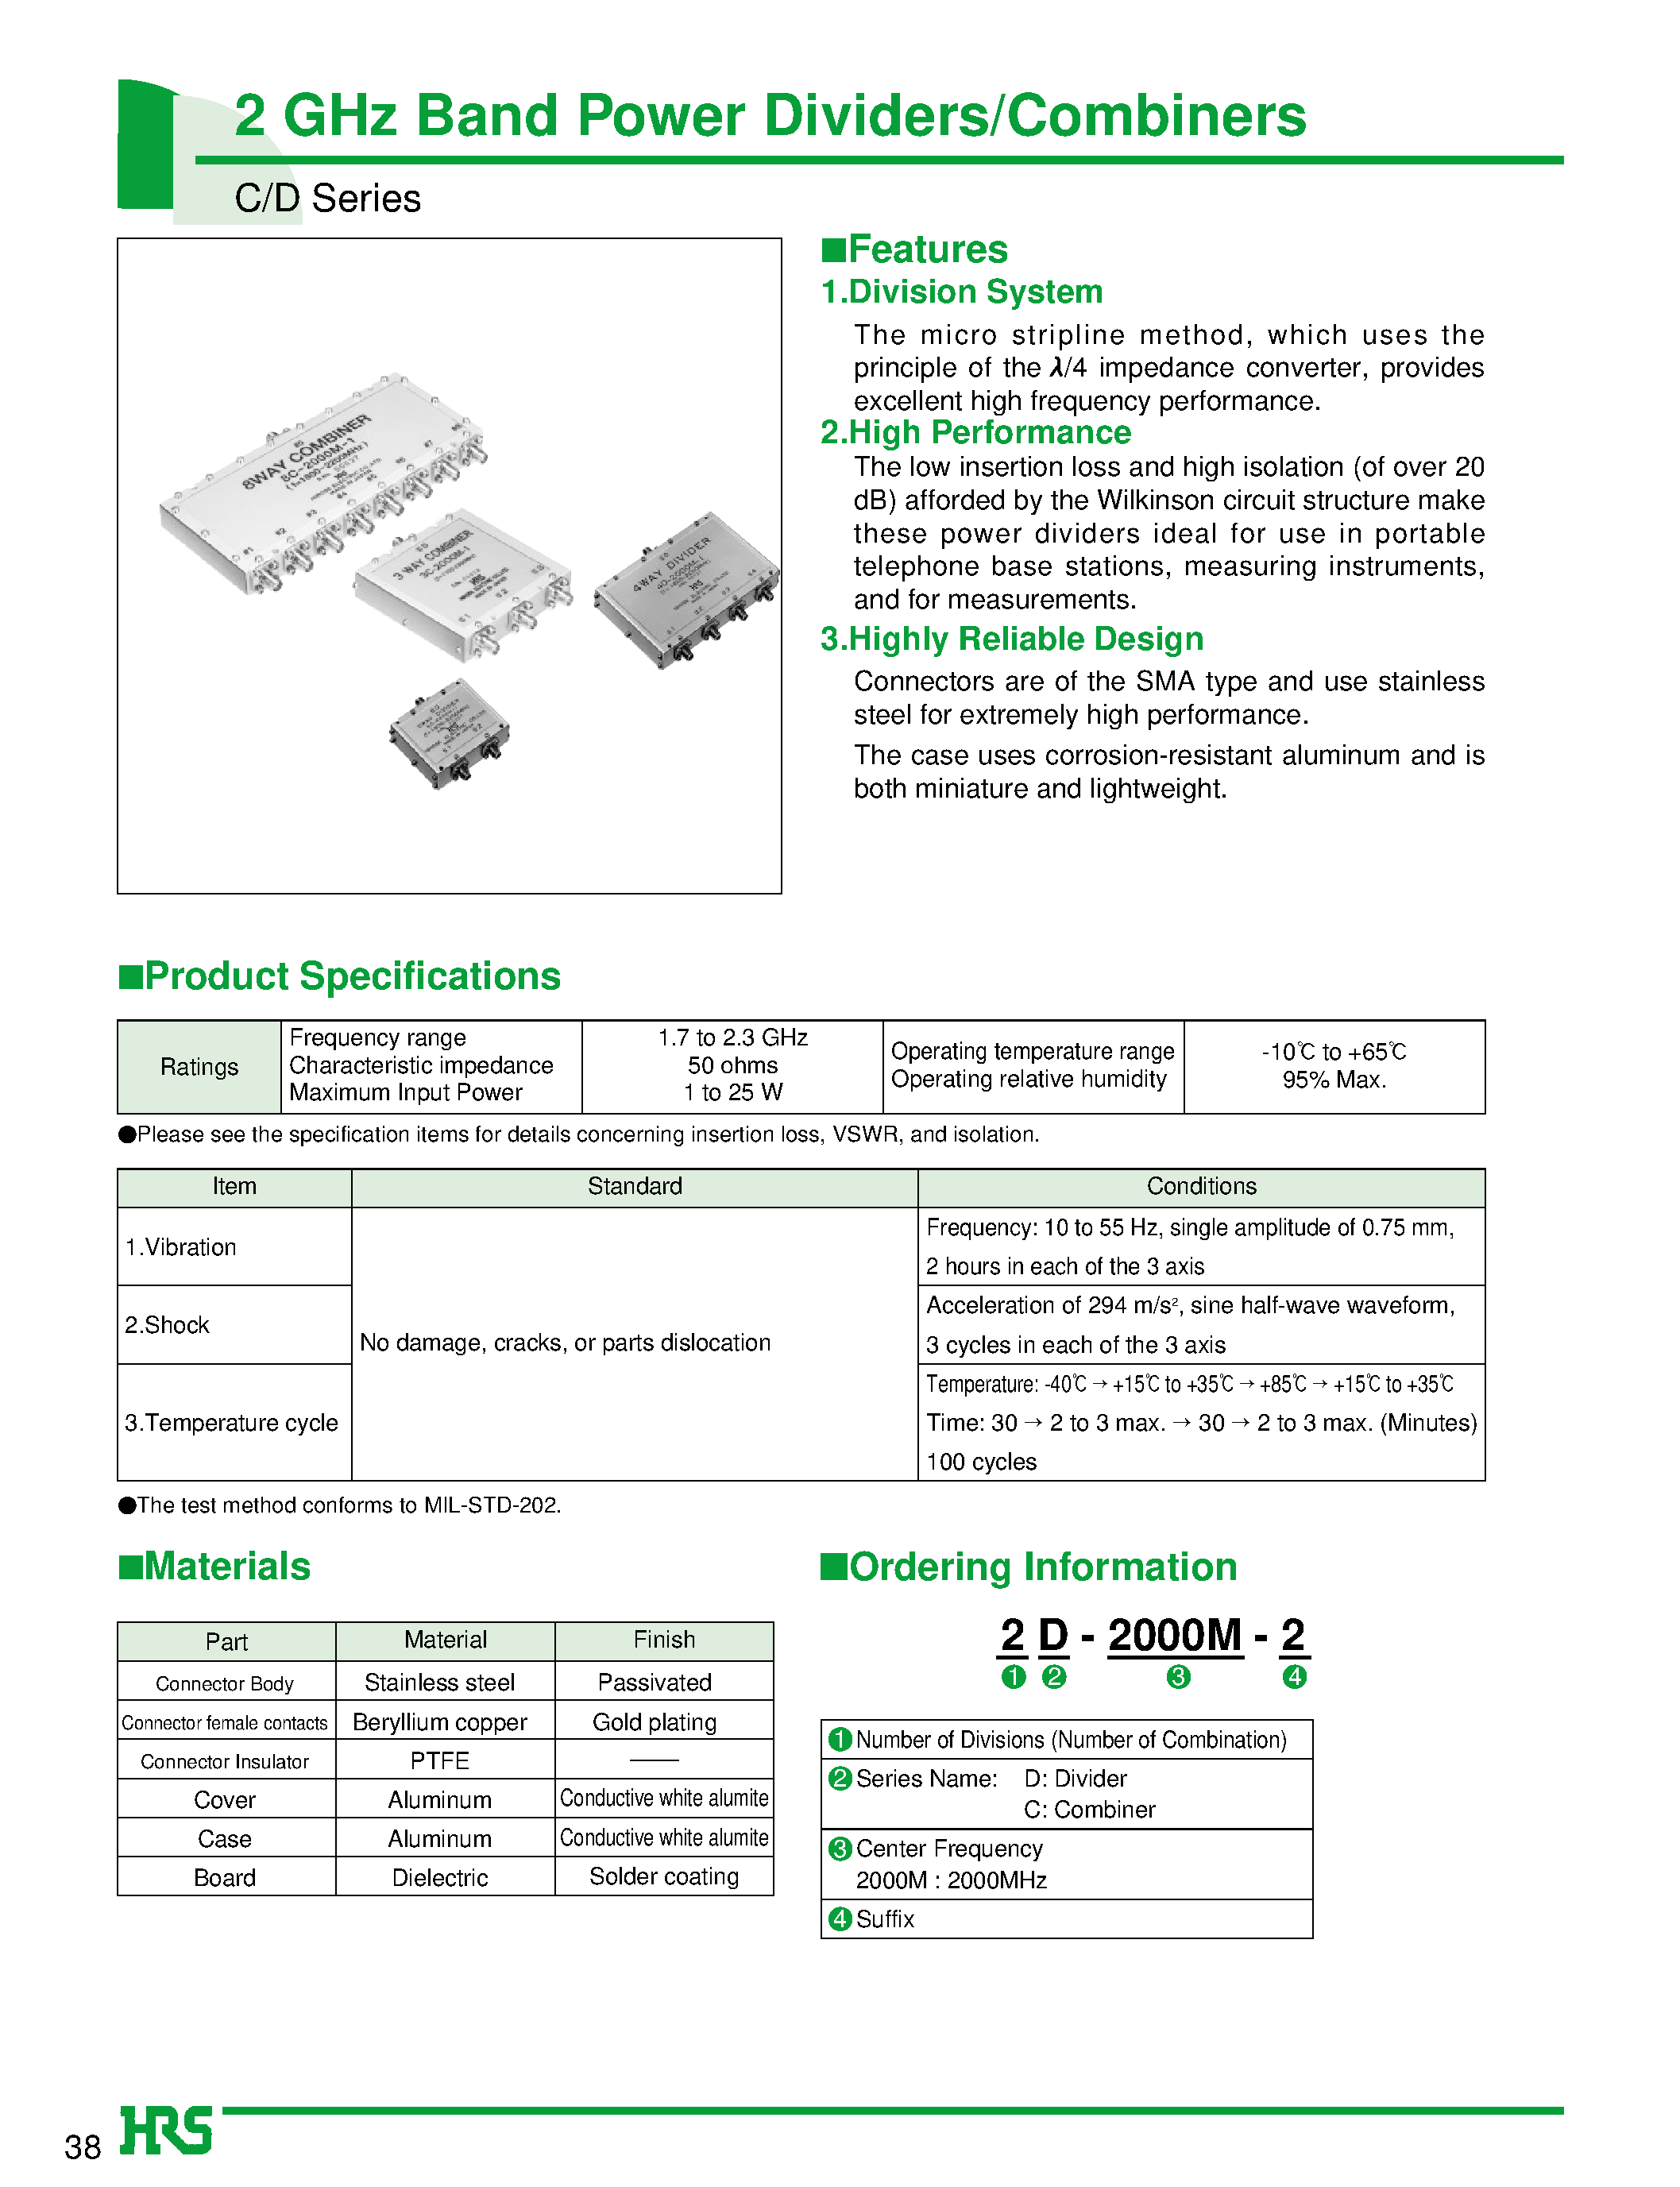 Datasheet 2D-2000M-2 - 2 GHz Band Power Dividers/Combiners page 1